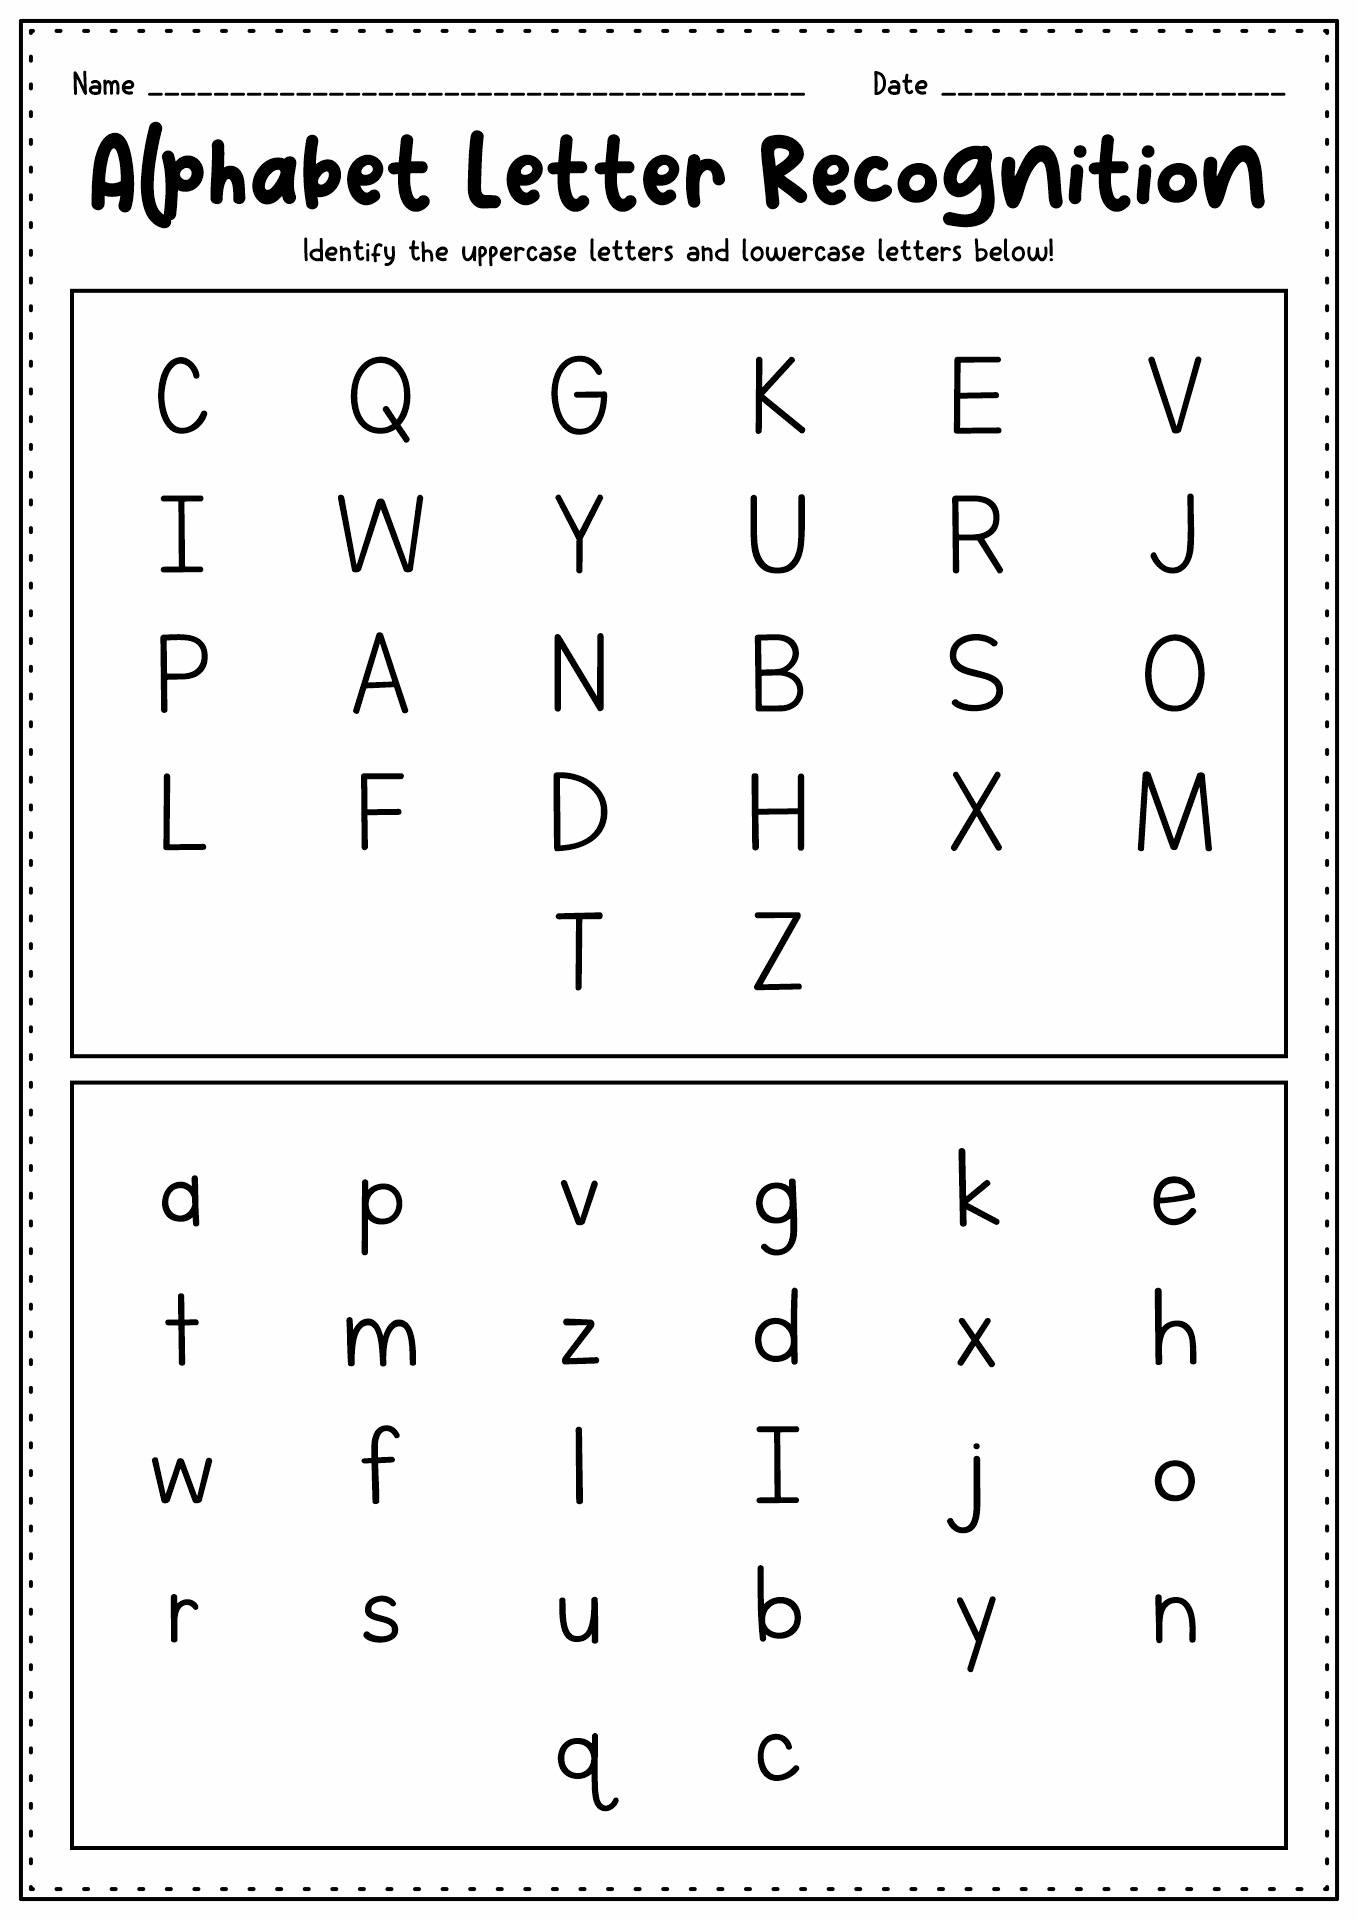 16 Best Images of Alphabet Homework Worksheets - Learning to Write